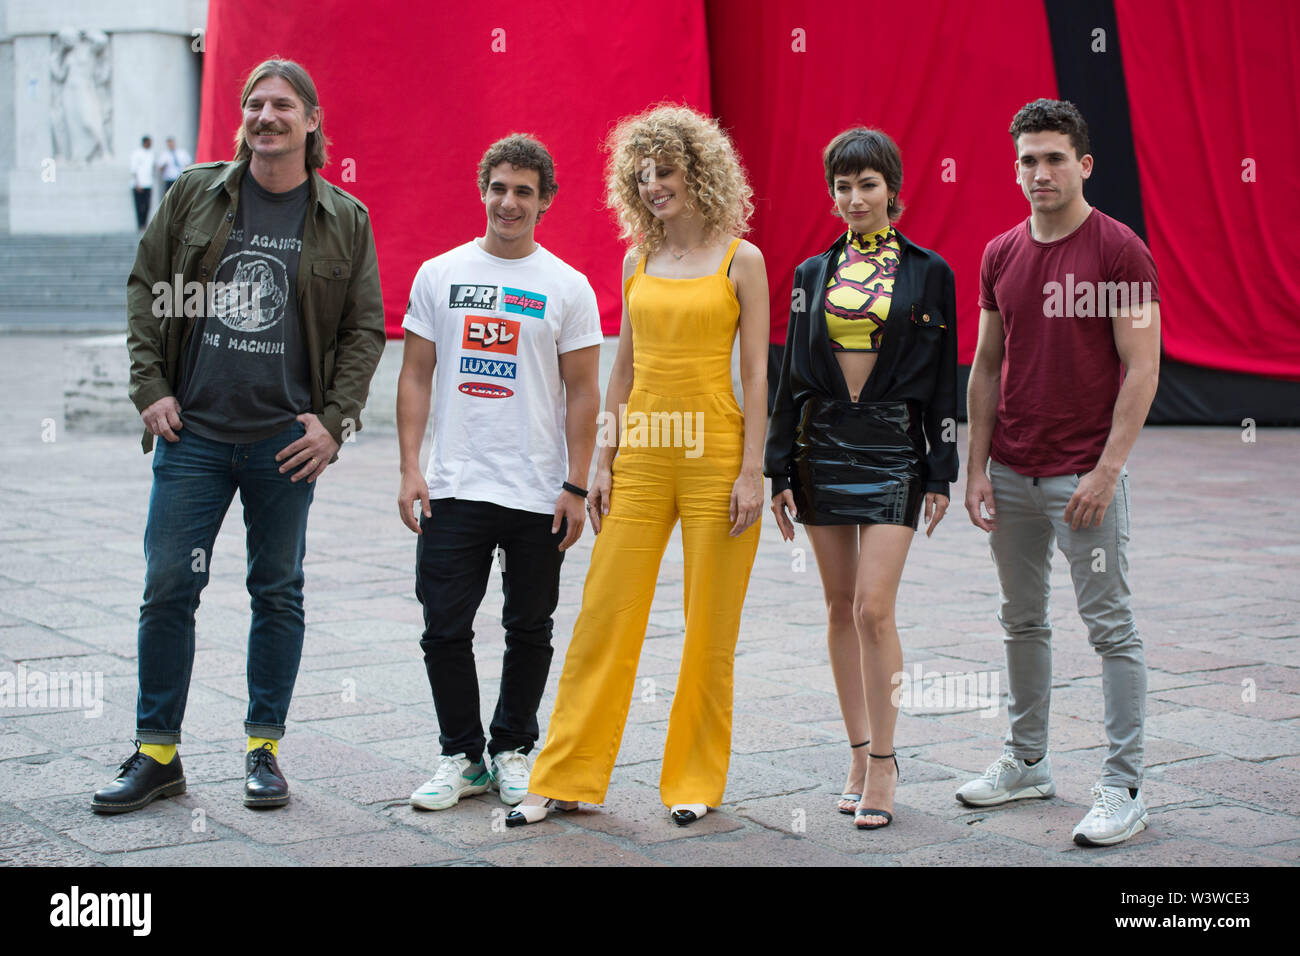 Milano, Italy. 17th July, 2019. The cast of "La Casa di Carta 3" in Milan  for the release of the new season. Credit: Pamela Rovaris/Pacific  Press/Alamy Live News Stock Photo - Alamy